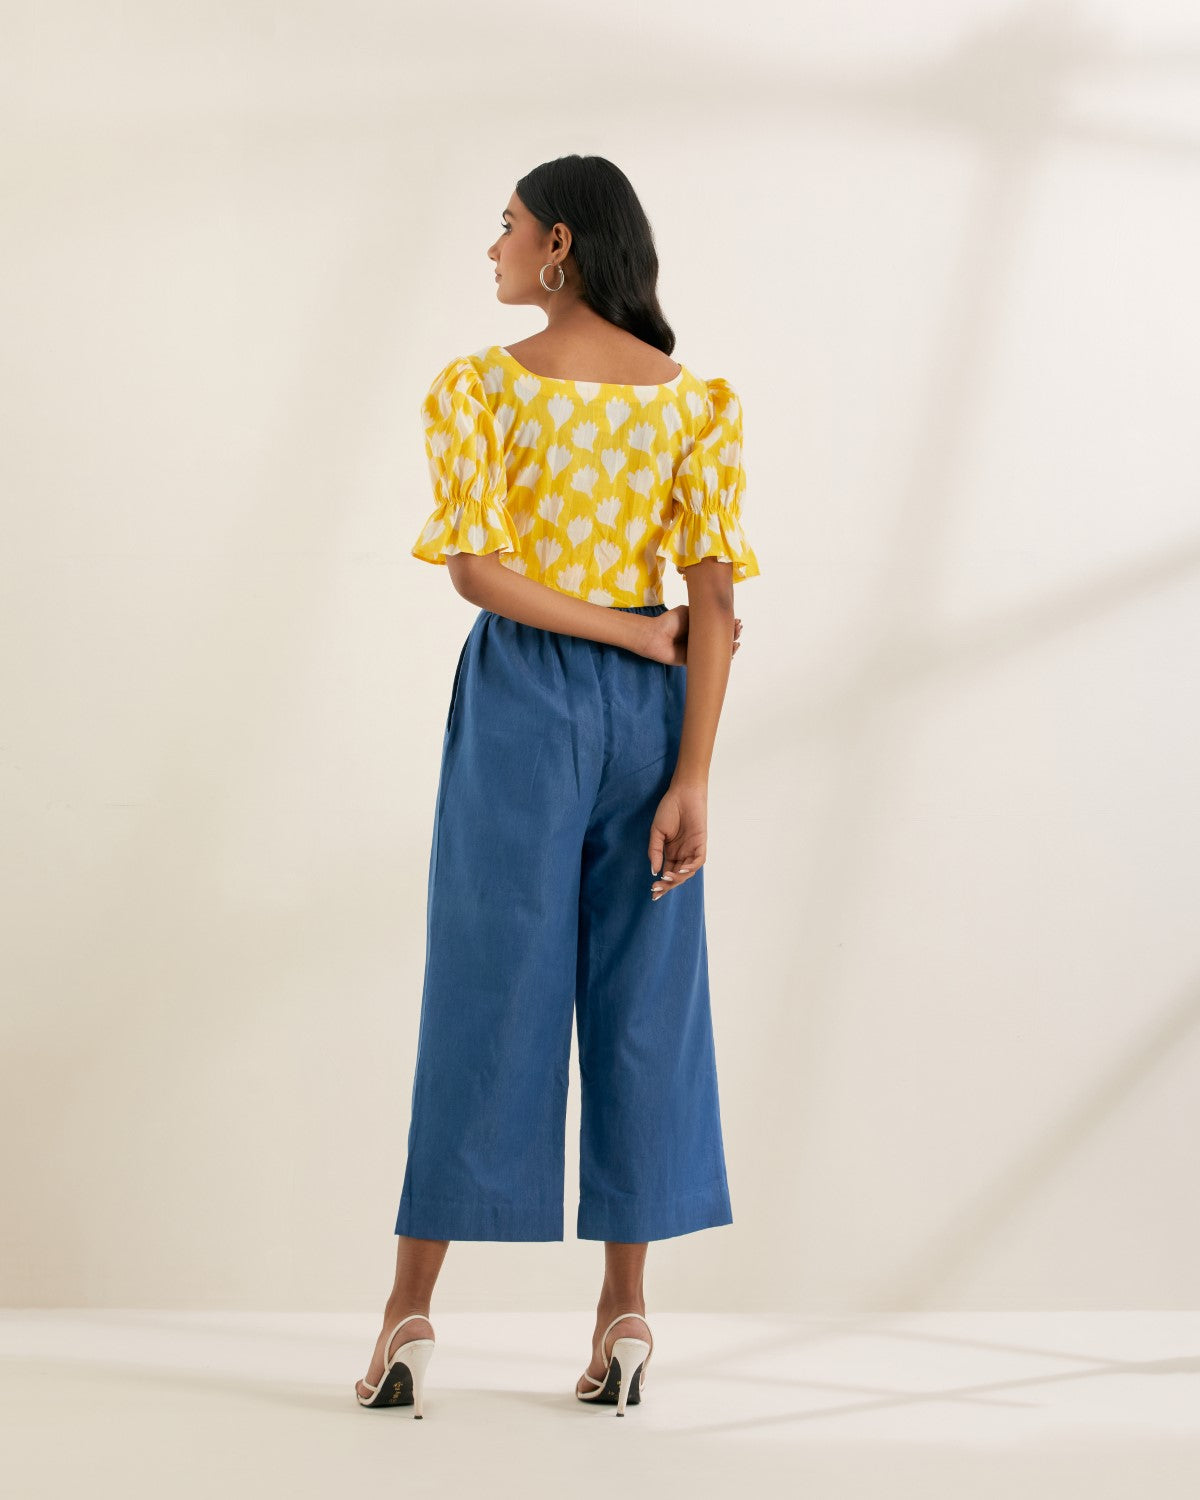 SUNSHINE- Yellow top with puff sleeves